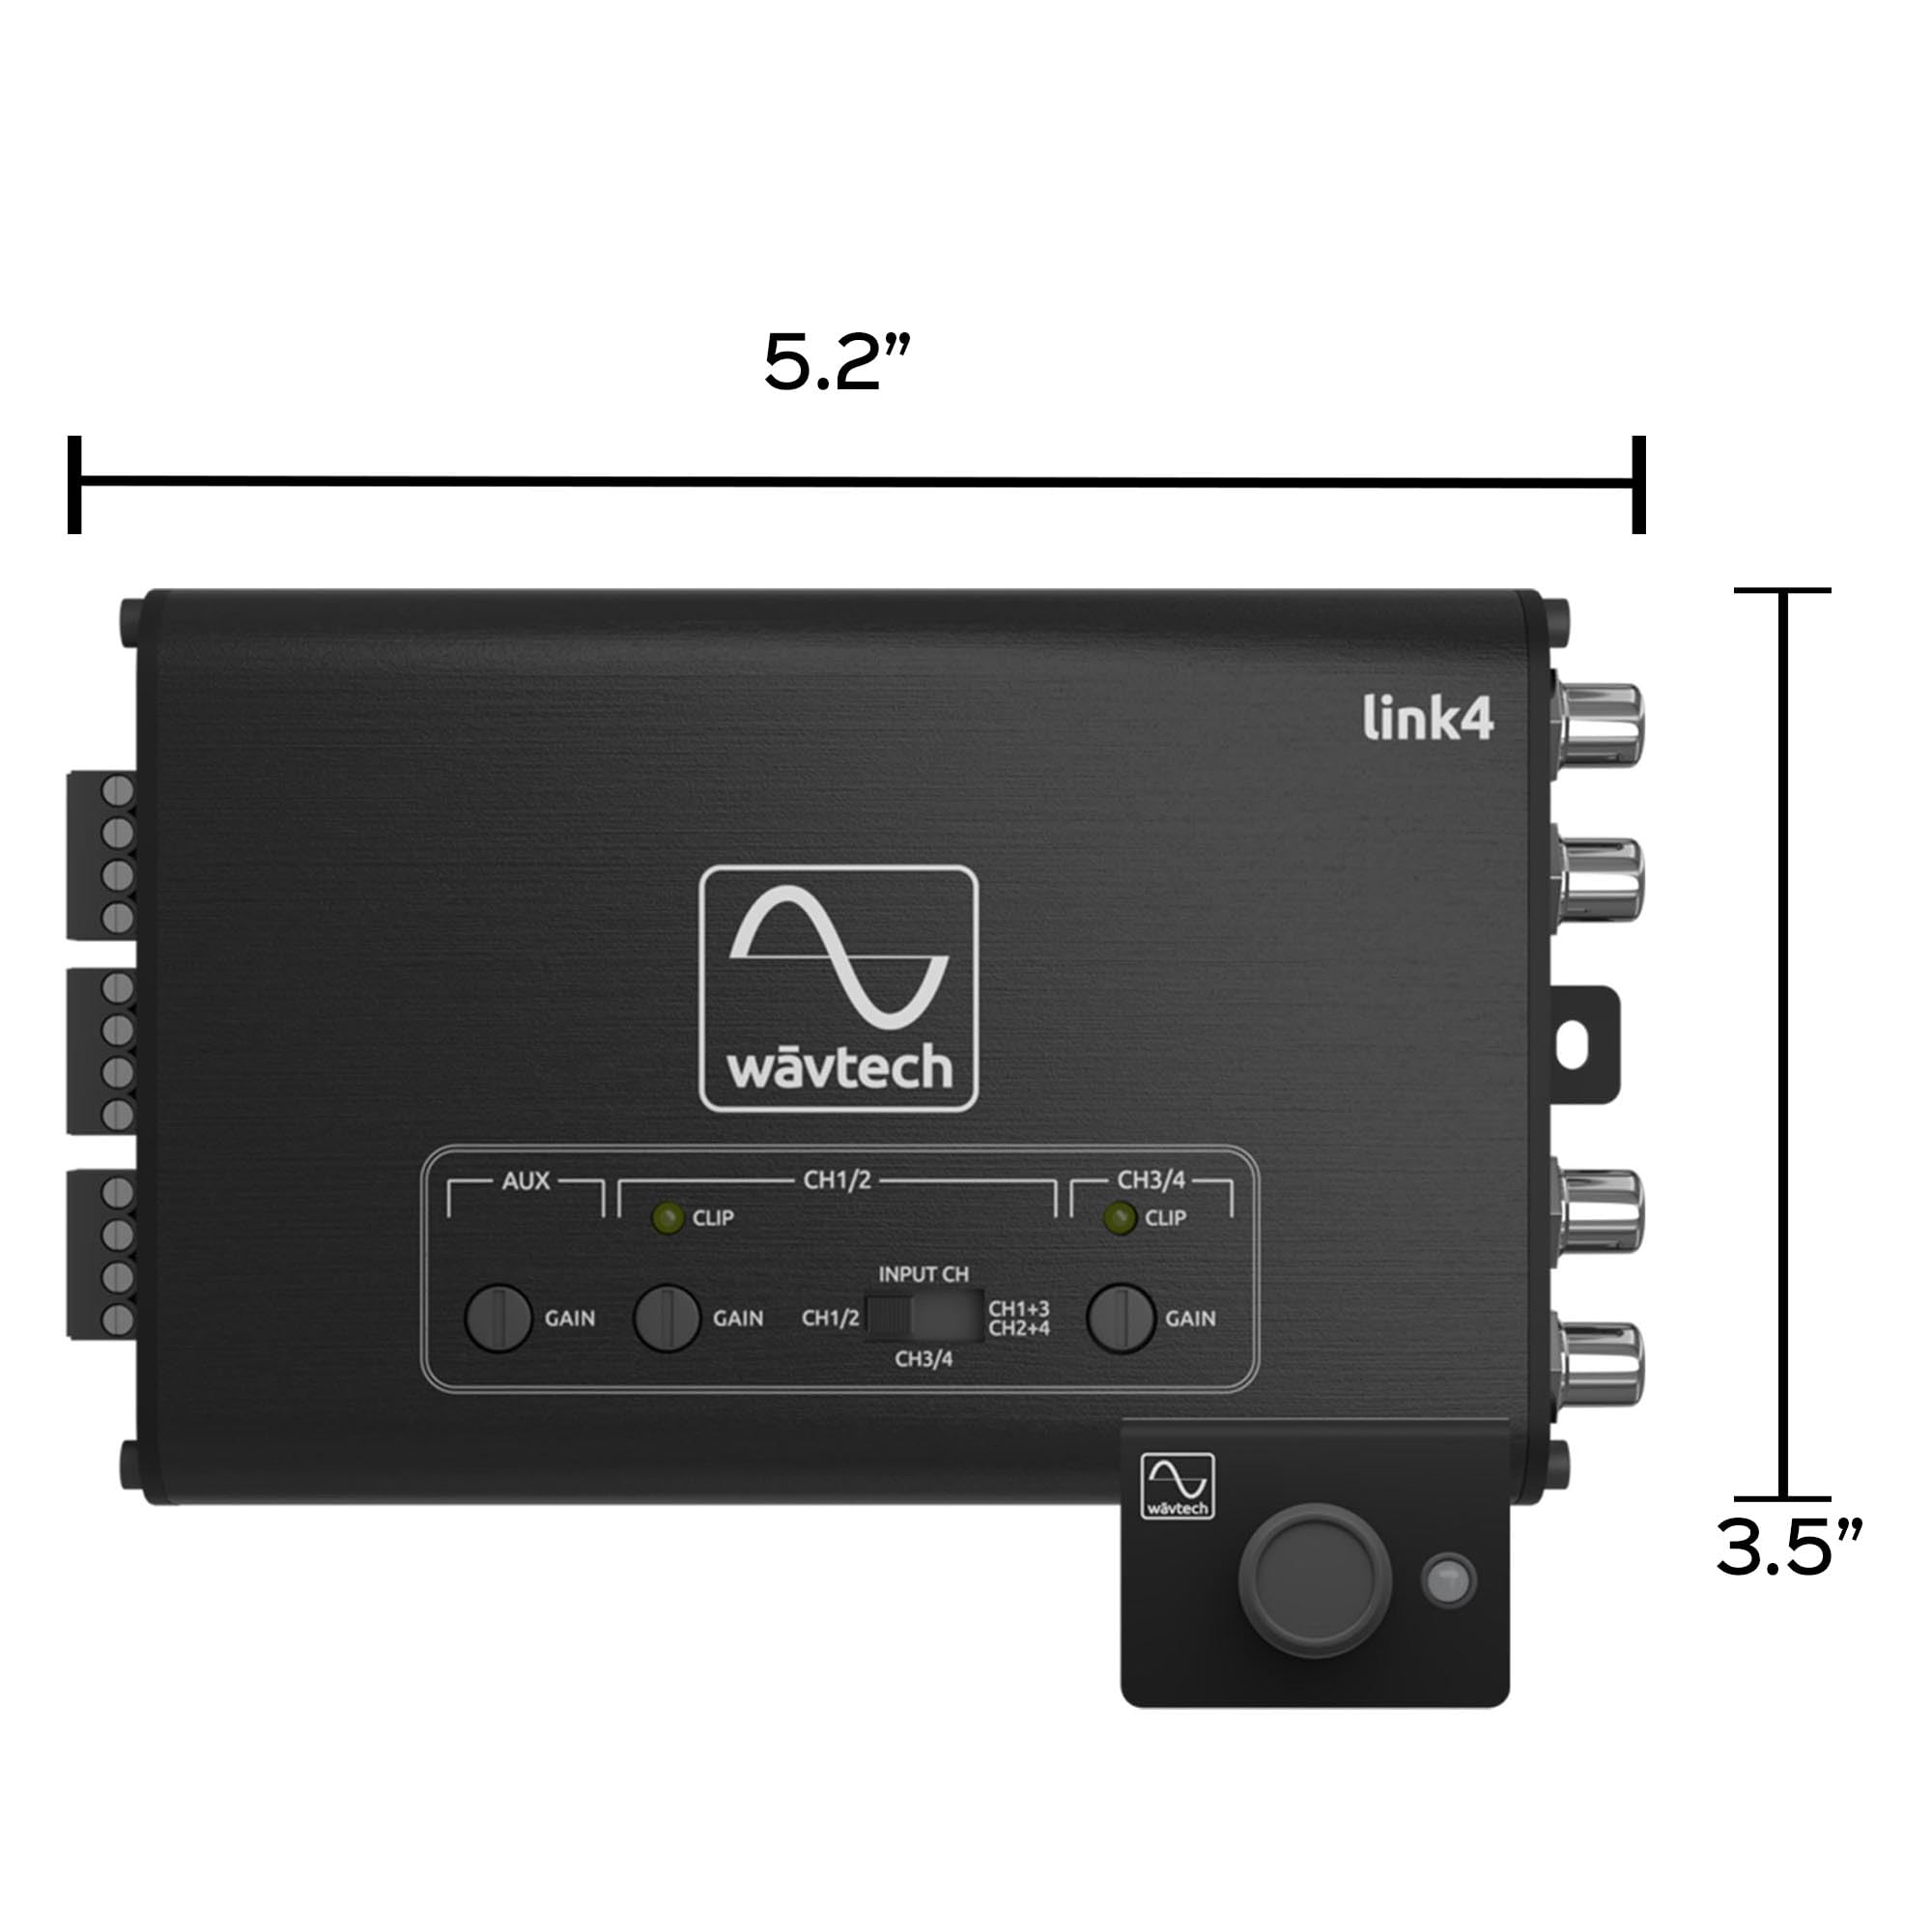 Wavtech link4-4-Channel Line Output Converter with AUX Input, Signal Summing and Remote